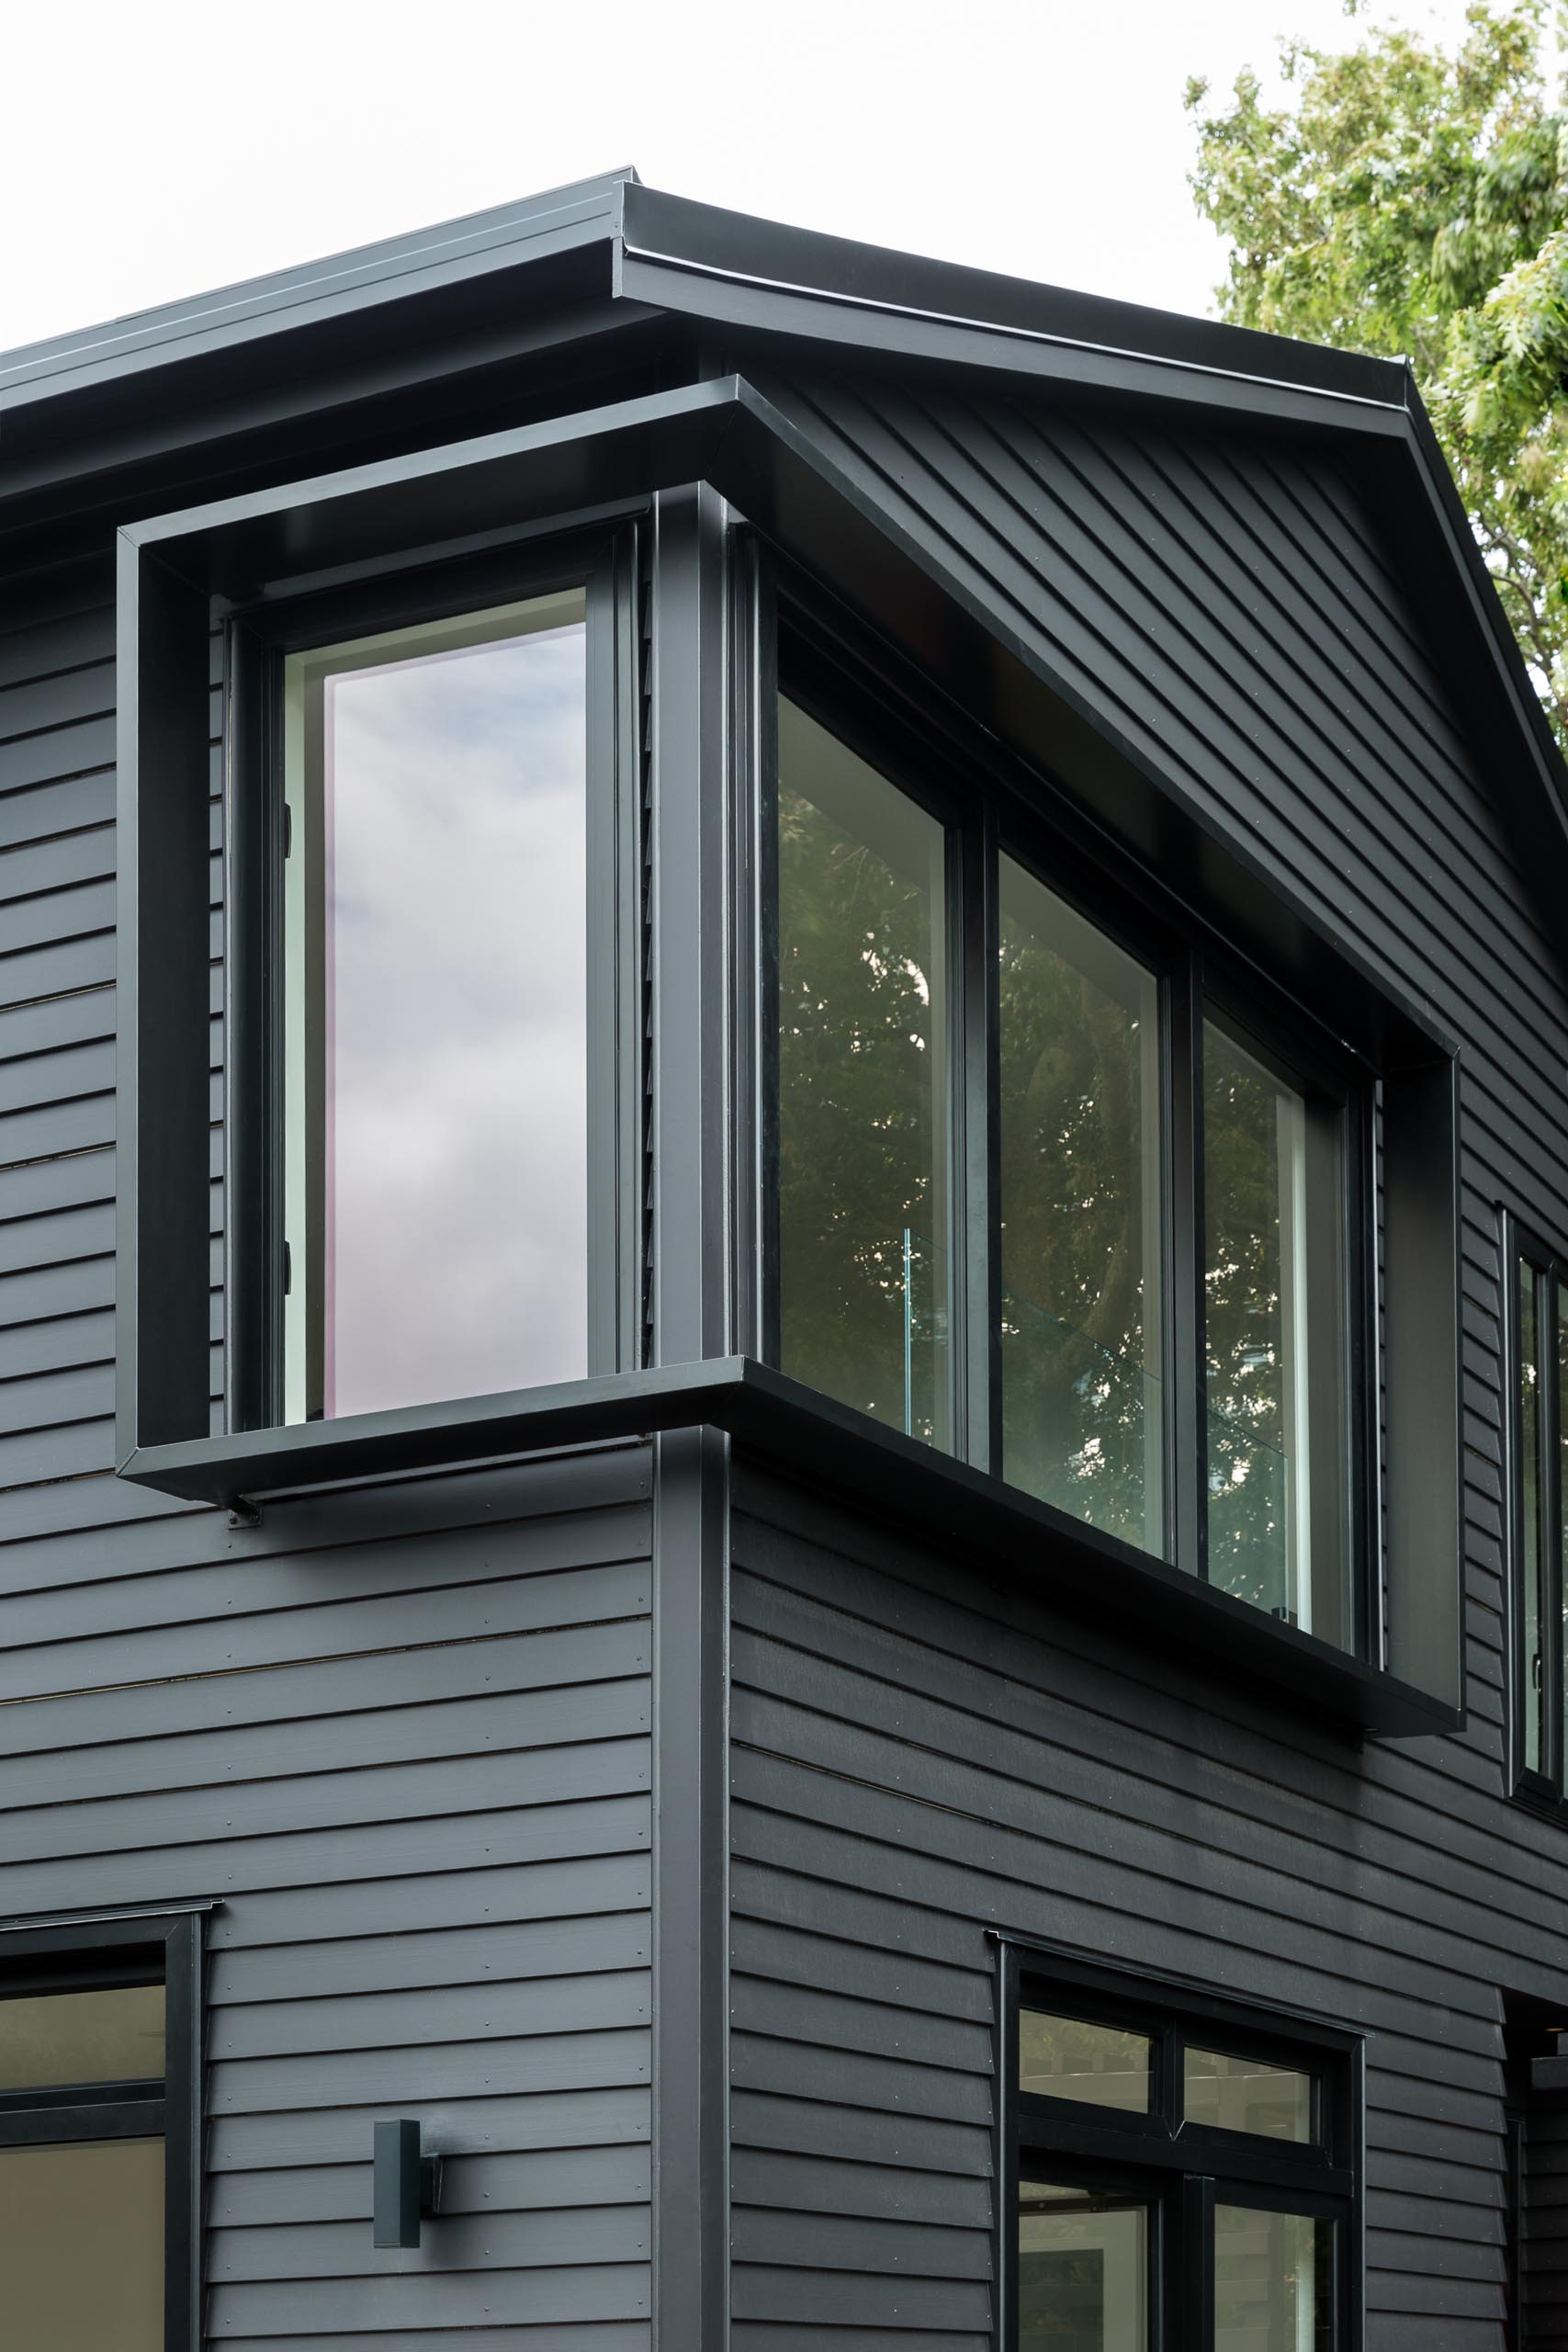 The window surround details of this modern black house are a common feature in the area, and were used to create additional light and shade detailing to the facade.